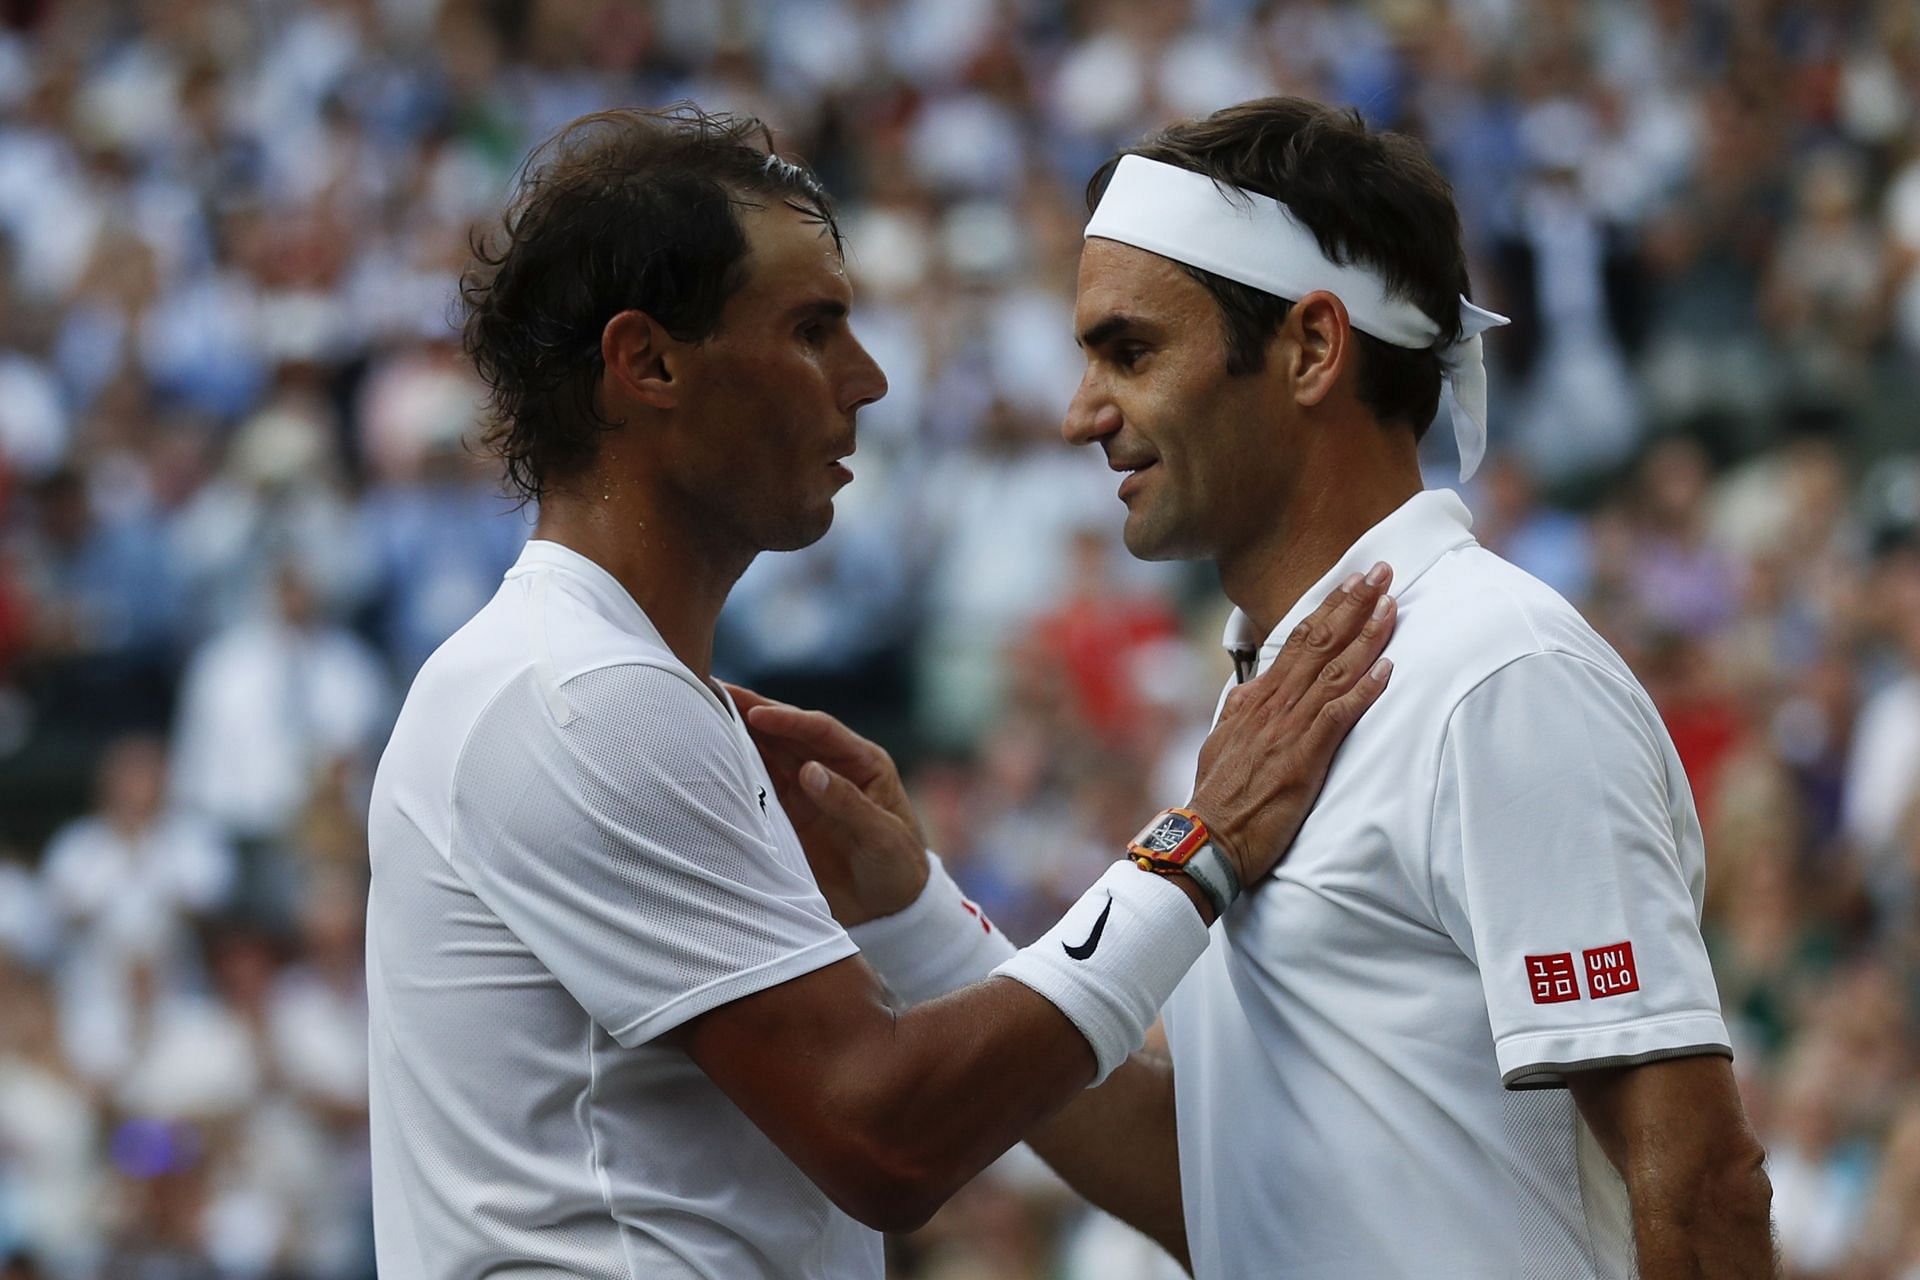 Rafael Nadal and Roger Federer at the 2019 Wimbledon